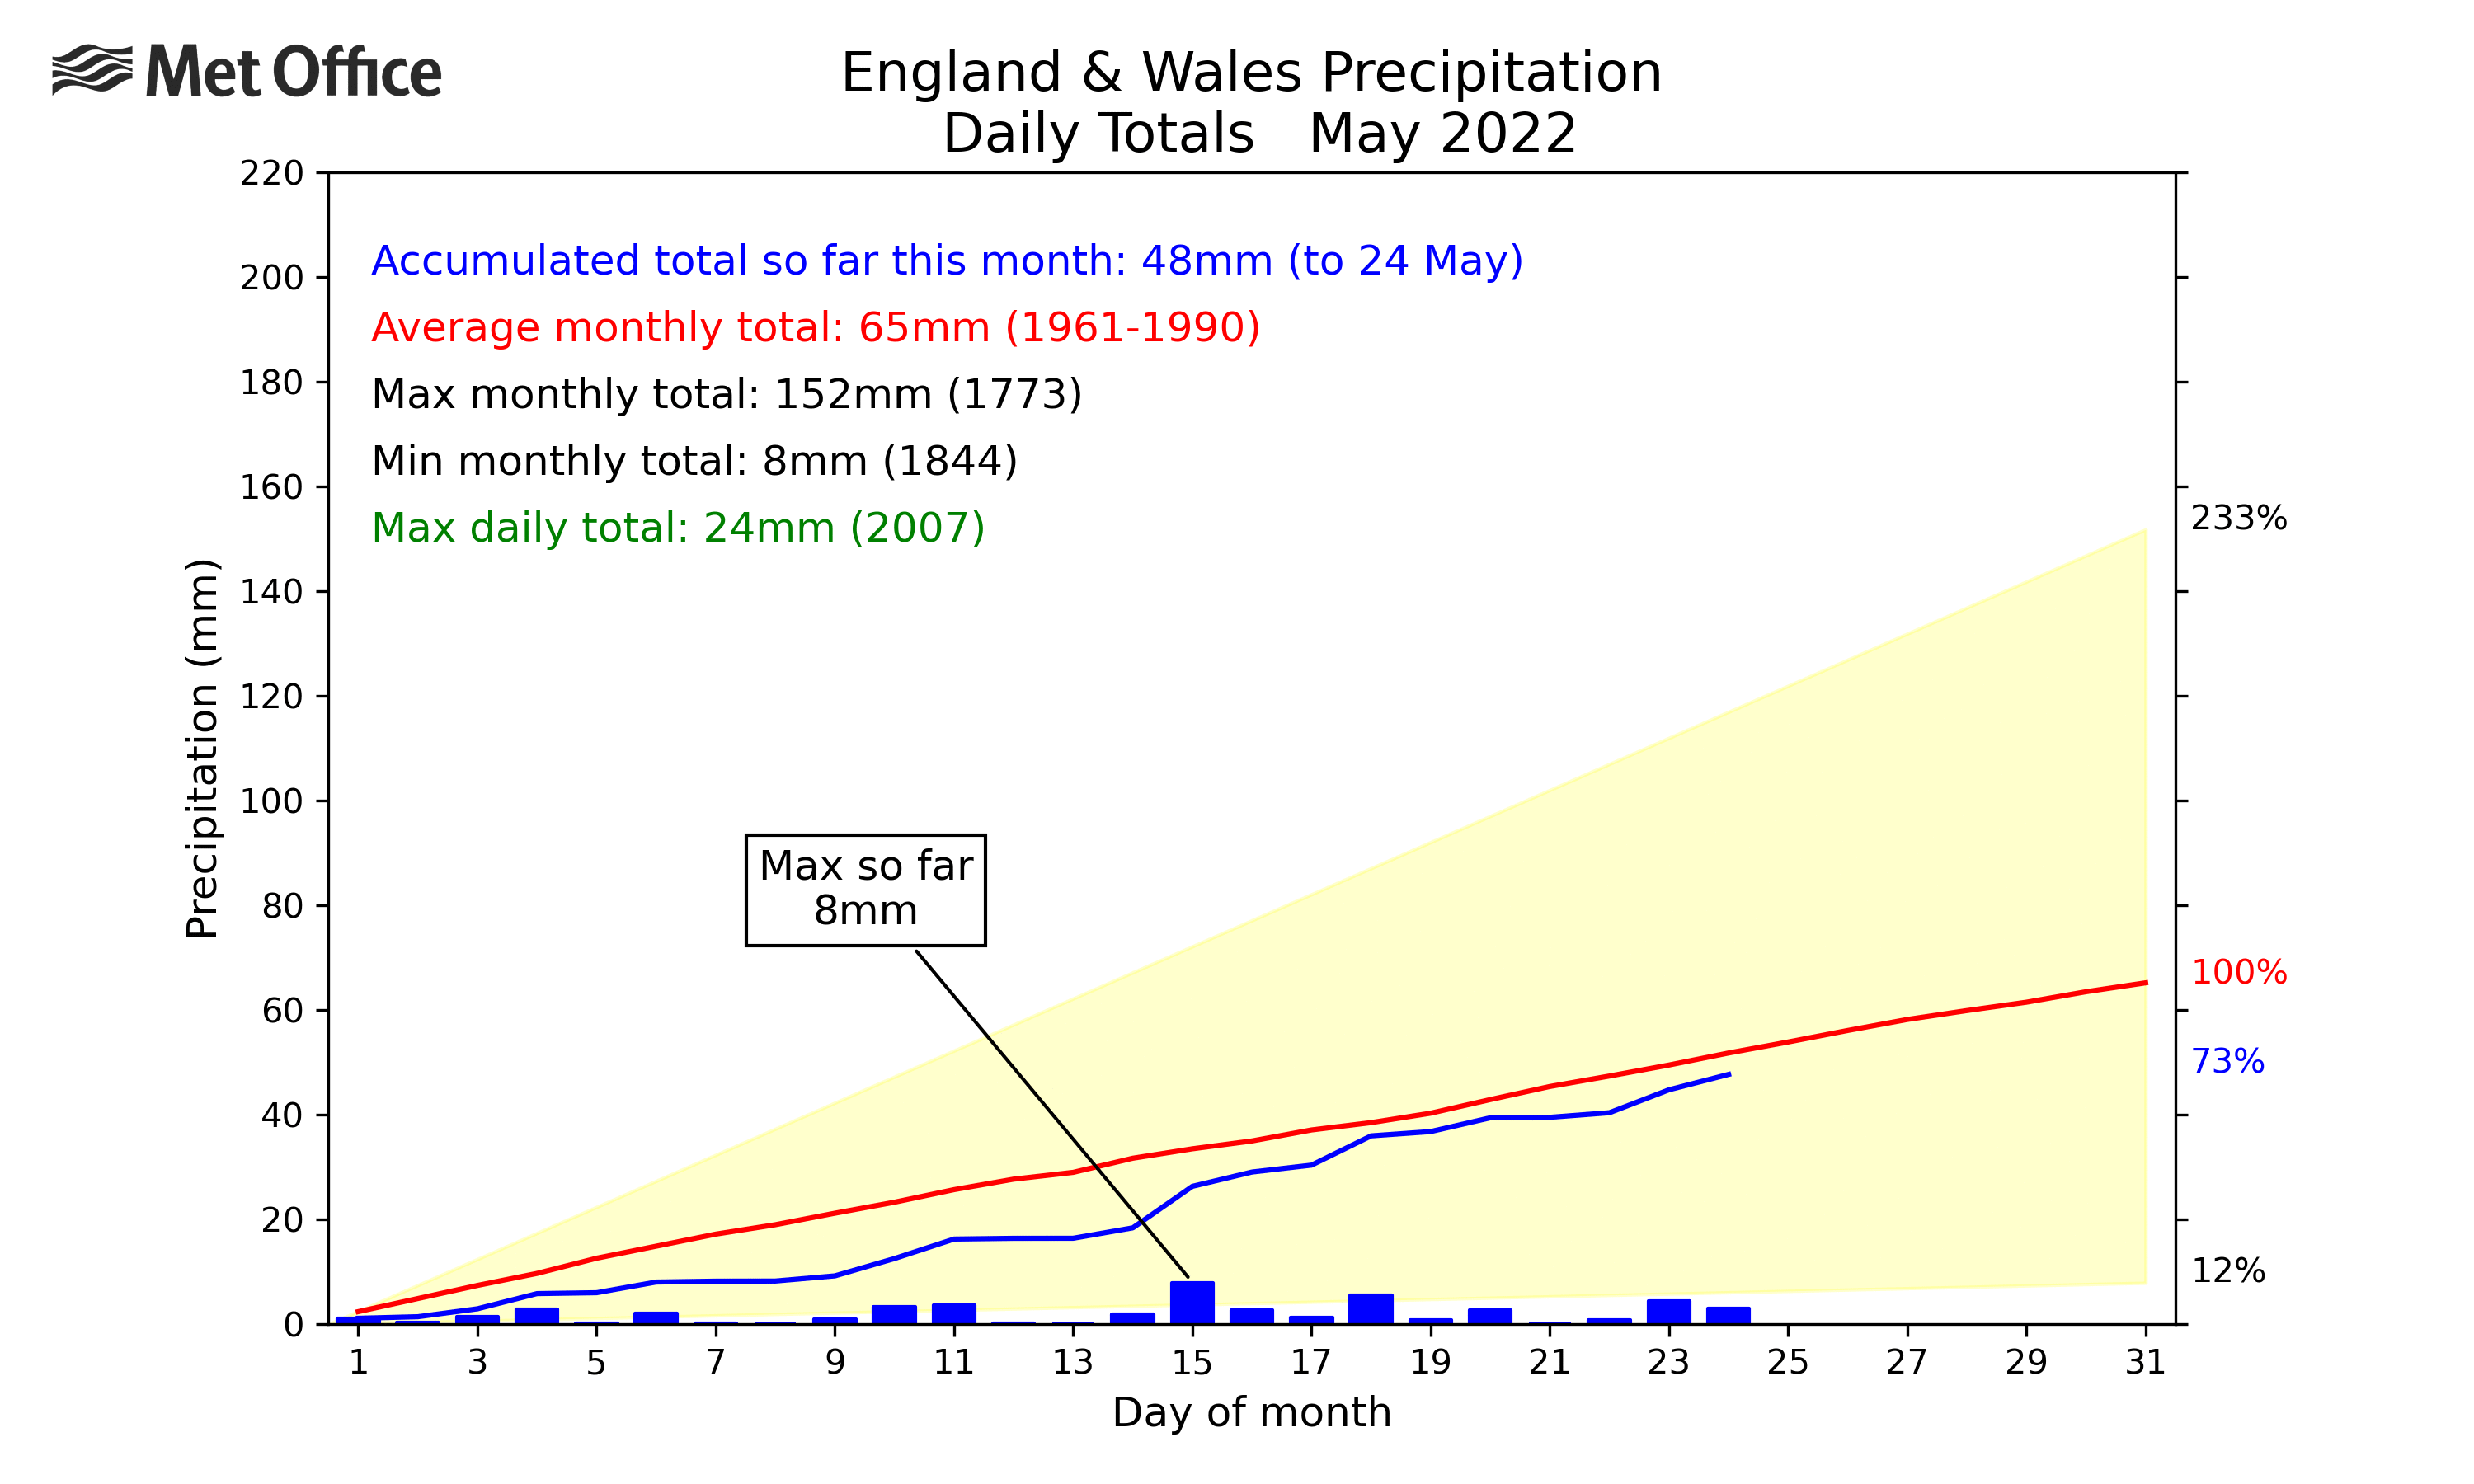 England and Wales daily preciptiation for current month